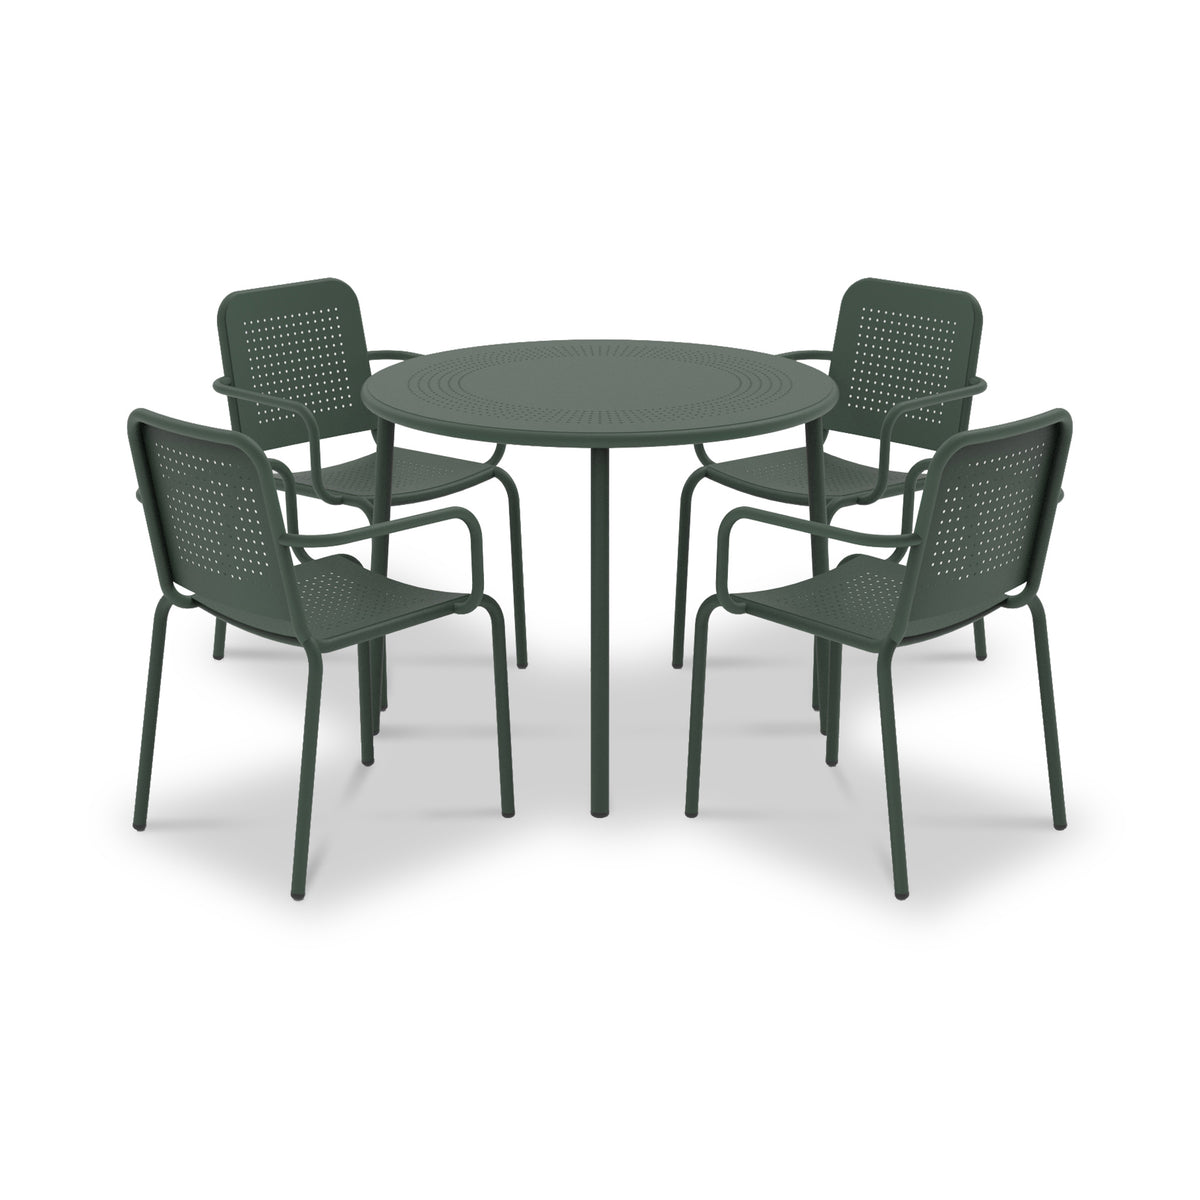 Porto Olive 4 Seater Round Dining Set from Roseland Furniture